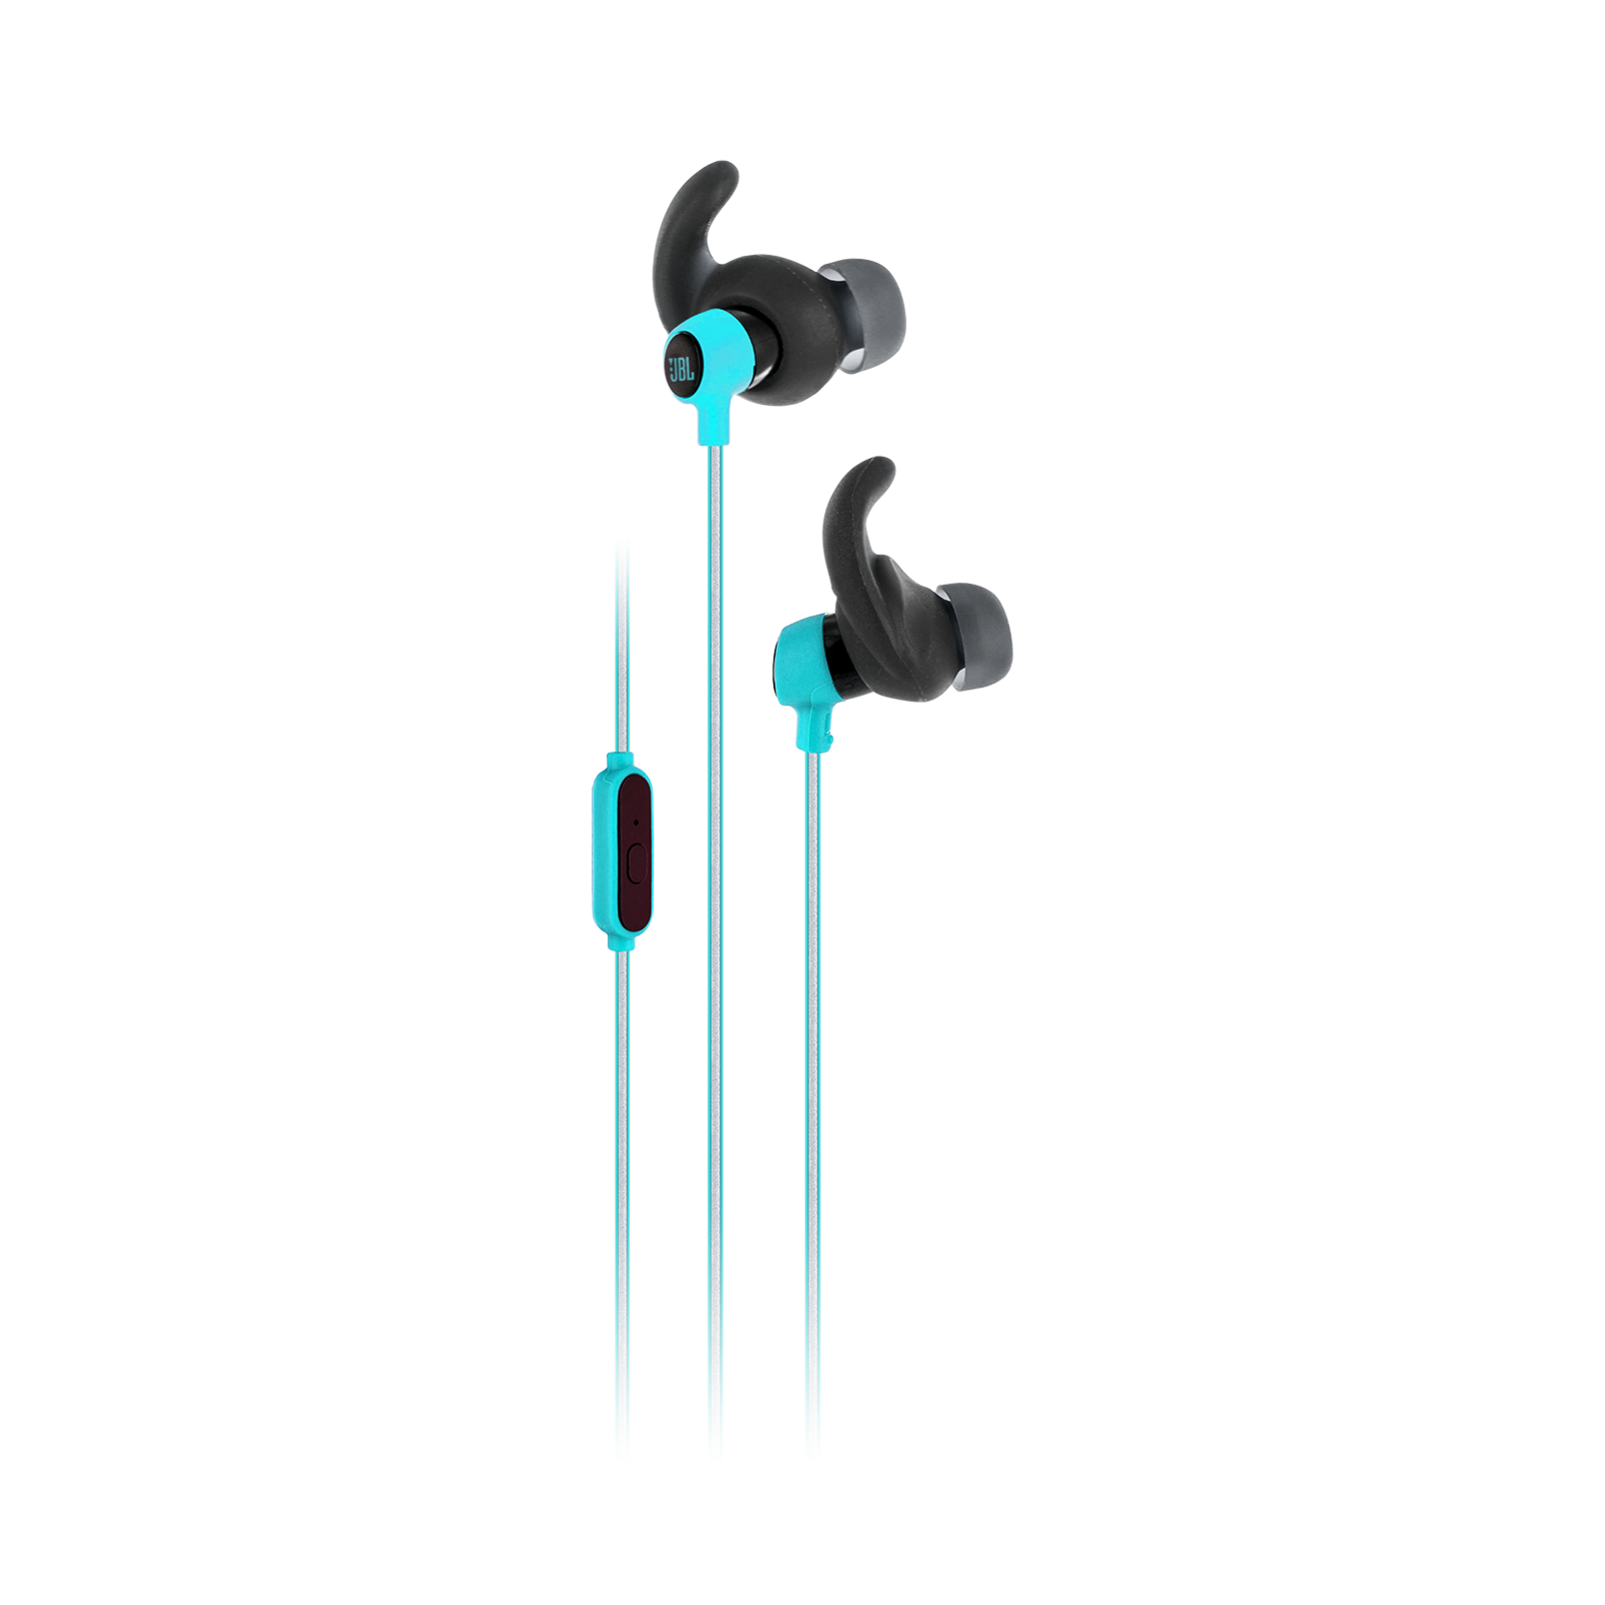 Save $50 on Reflect Mini. Lightweight, In-Ear Sport Heapdhones. Sale price $9.95. Shop now.